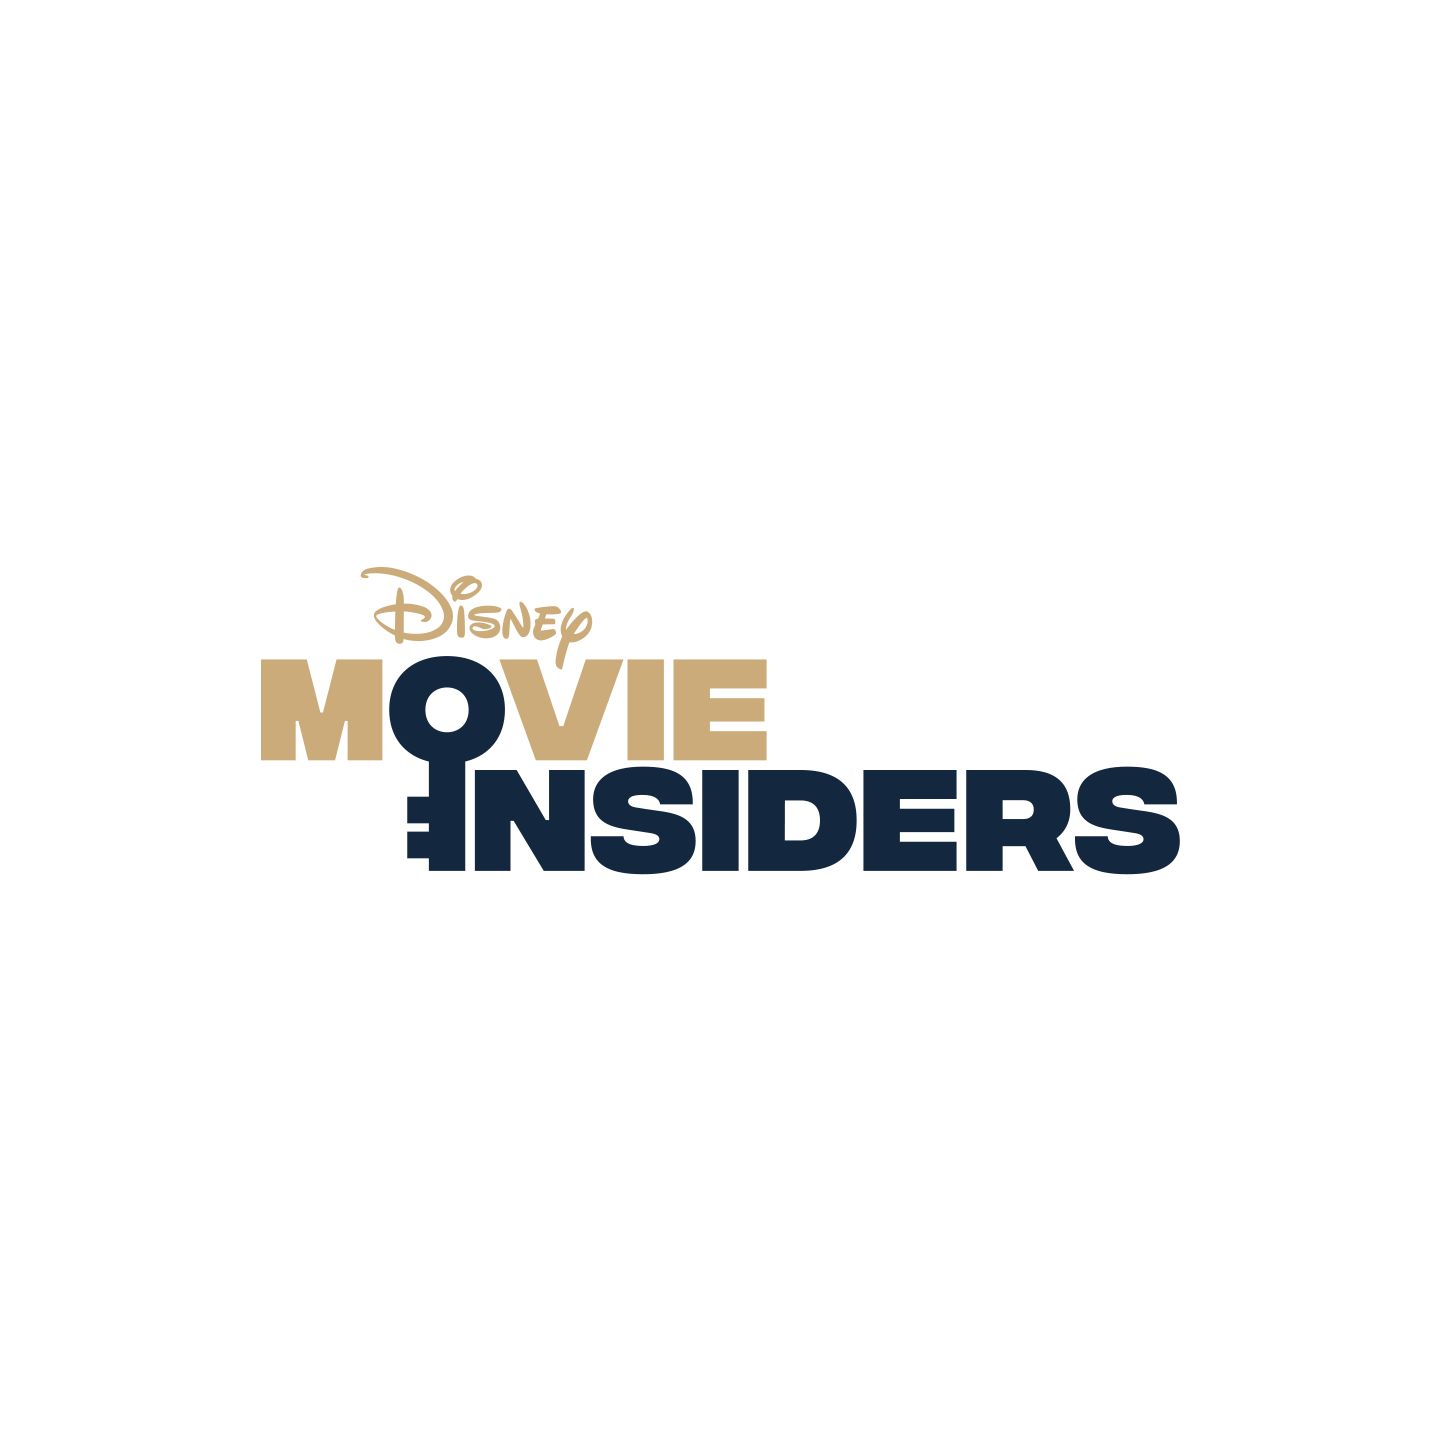 Disney Movie Insiders Program Changes Update- Click to Learn More